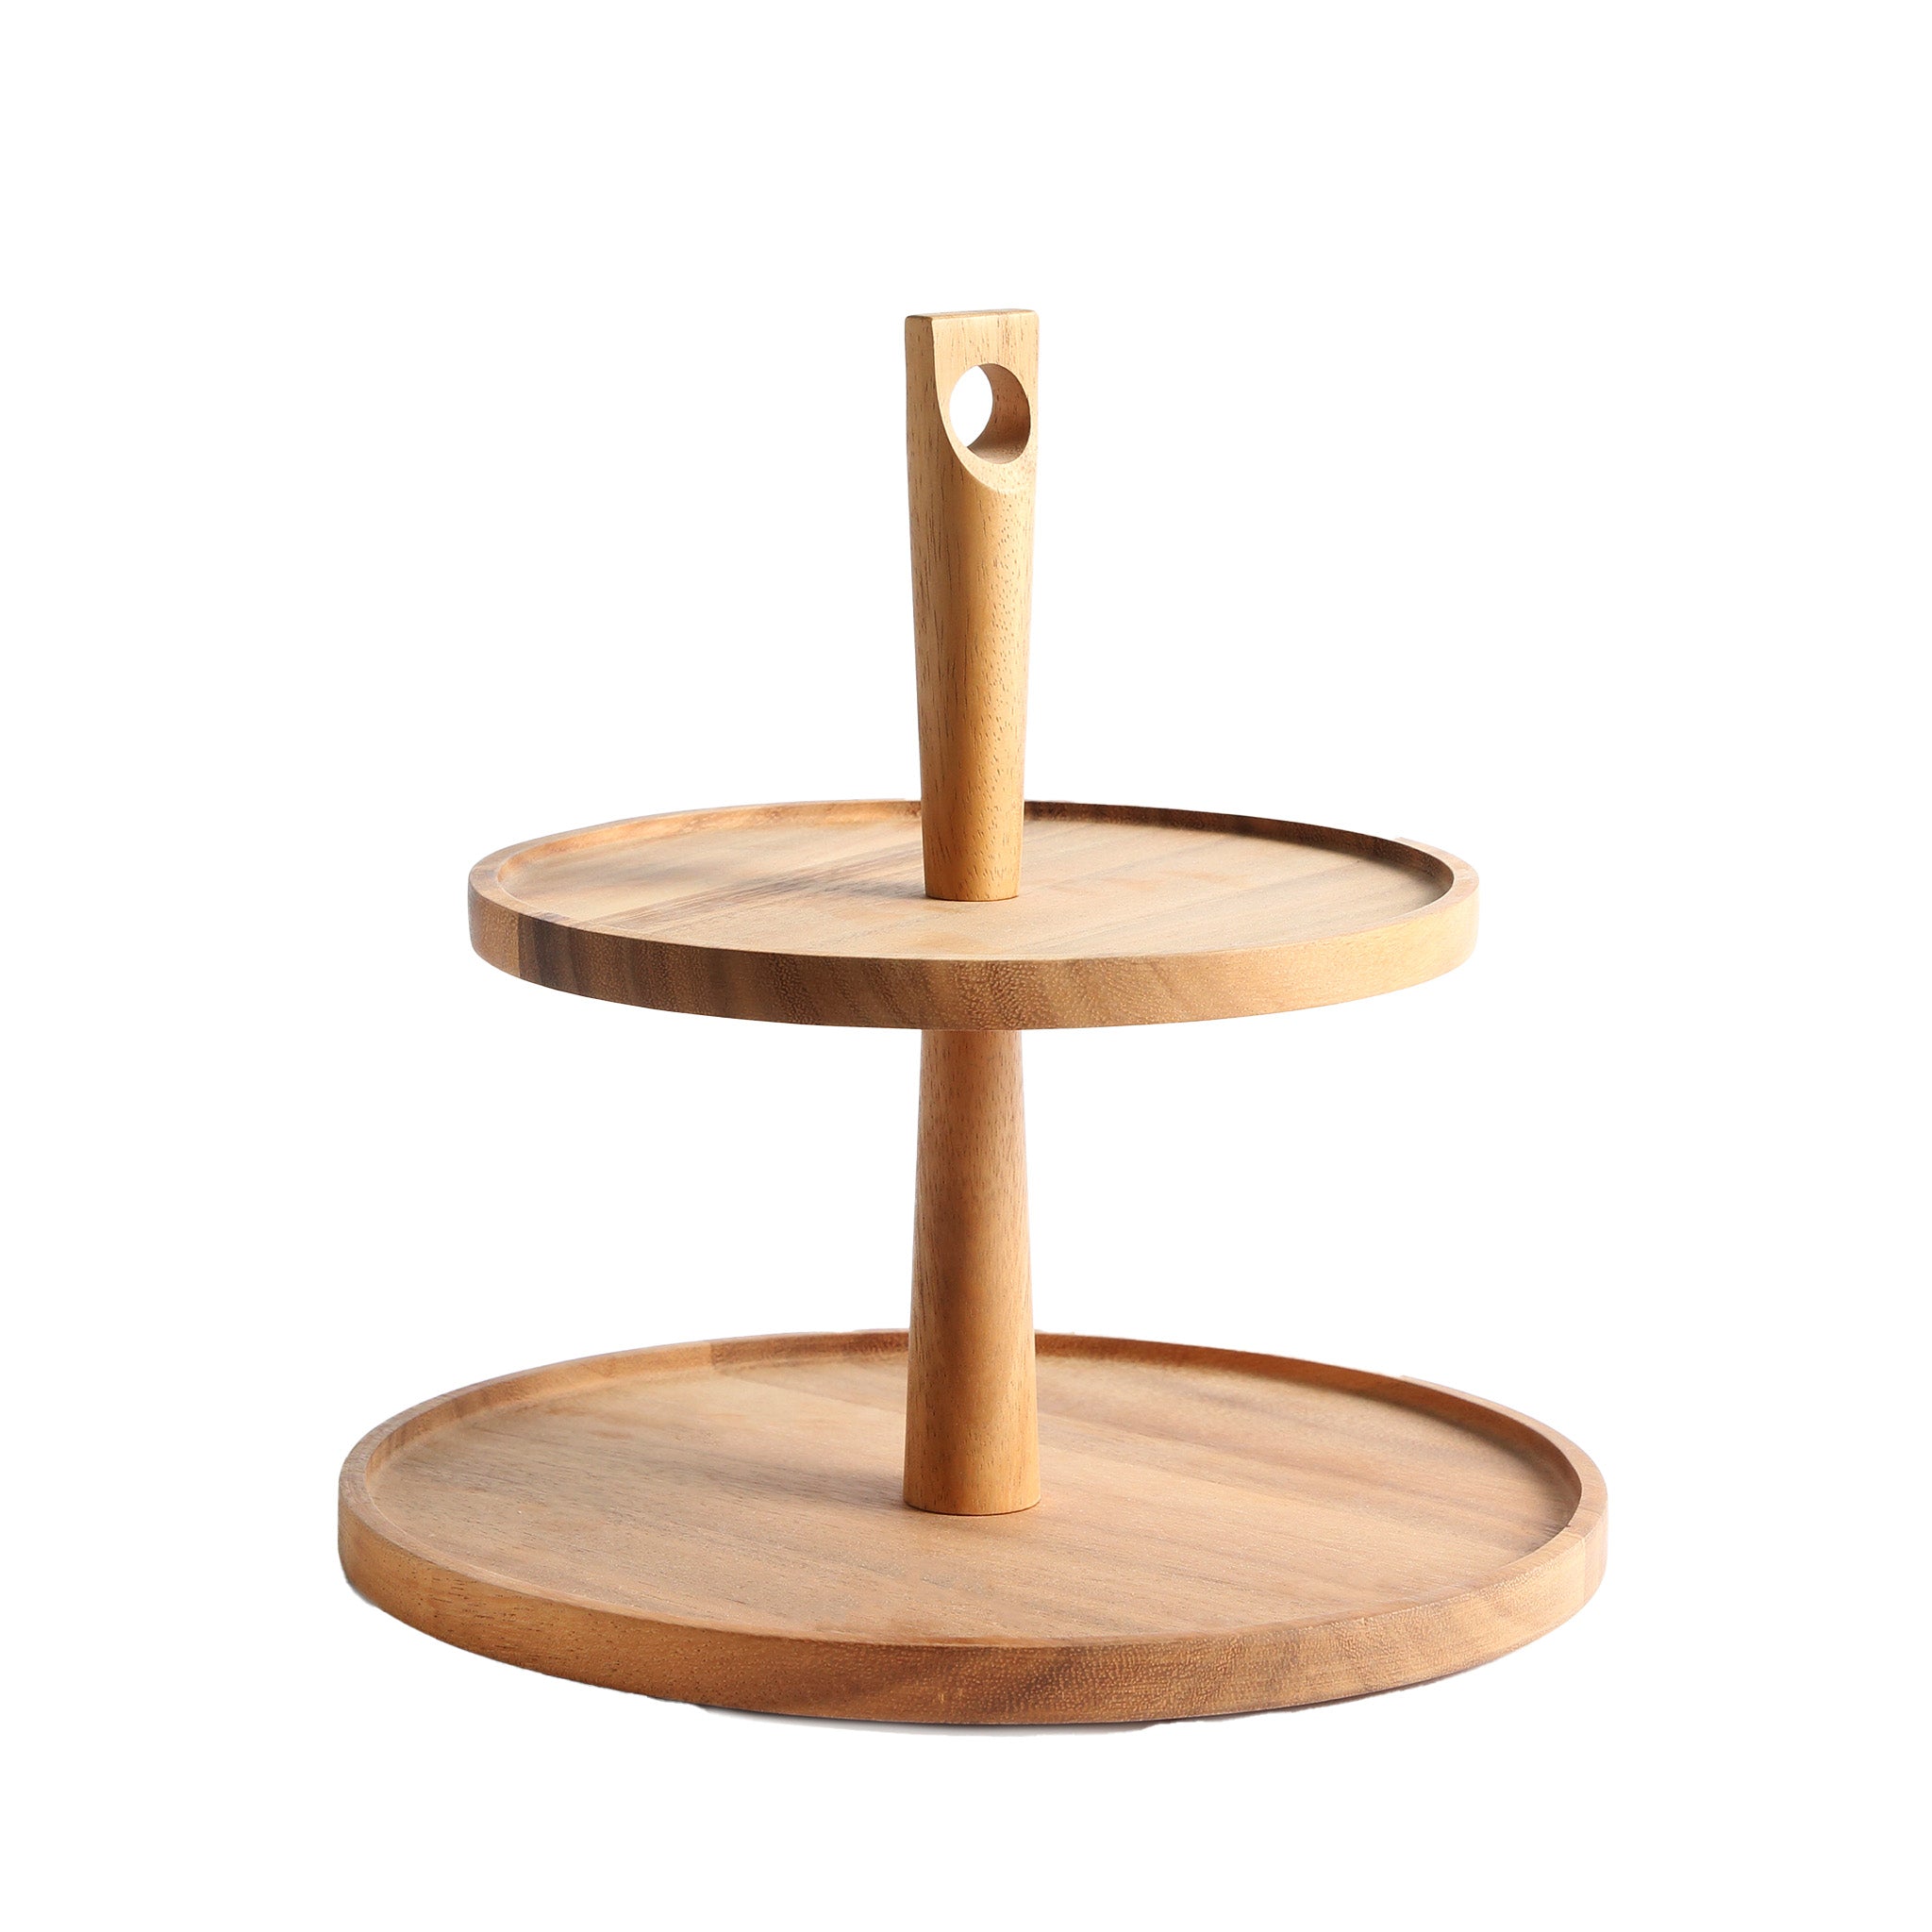 CYNOSURE 2 TIERS CAKE STAND